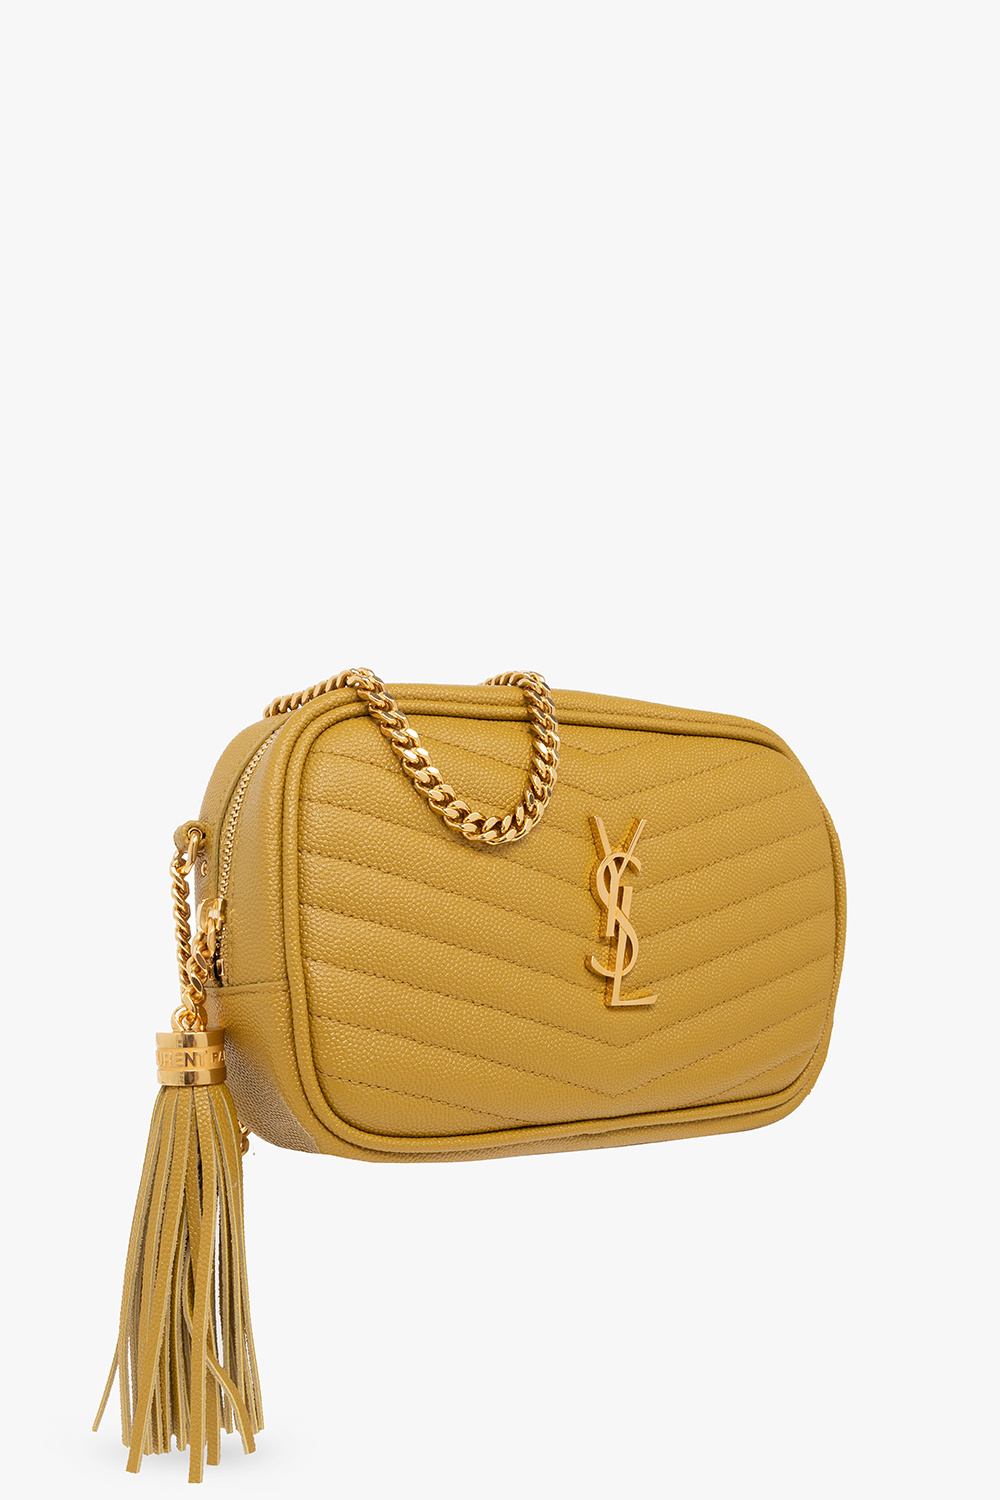 SAINT LAURENT: Lou quilted leather bag - Yellow Cream